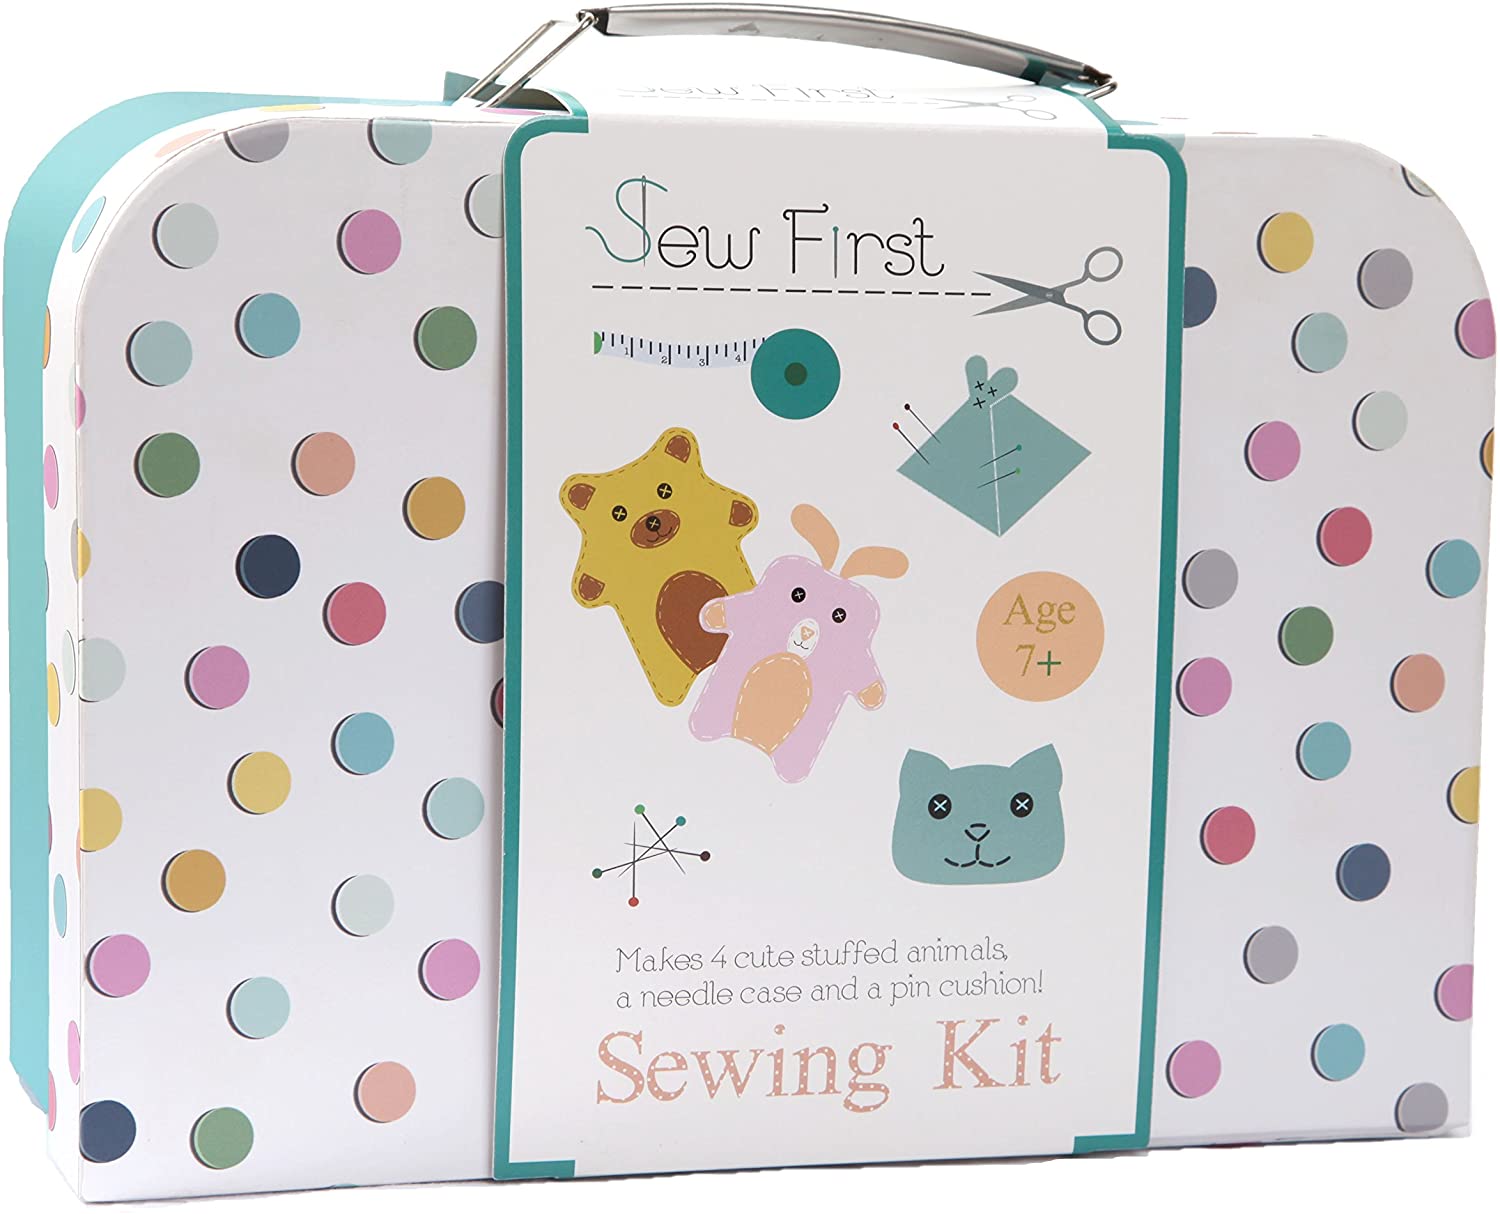 sewing kit gifts for kids for hanukkah